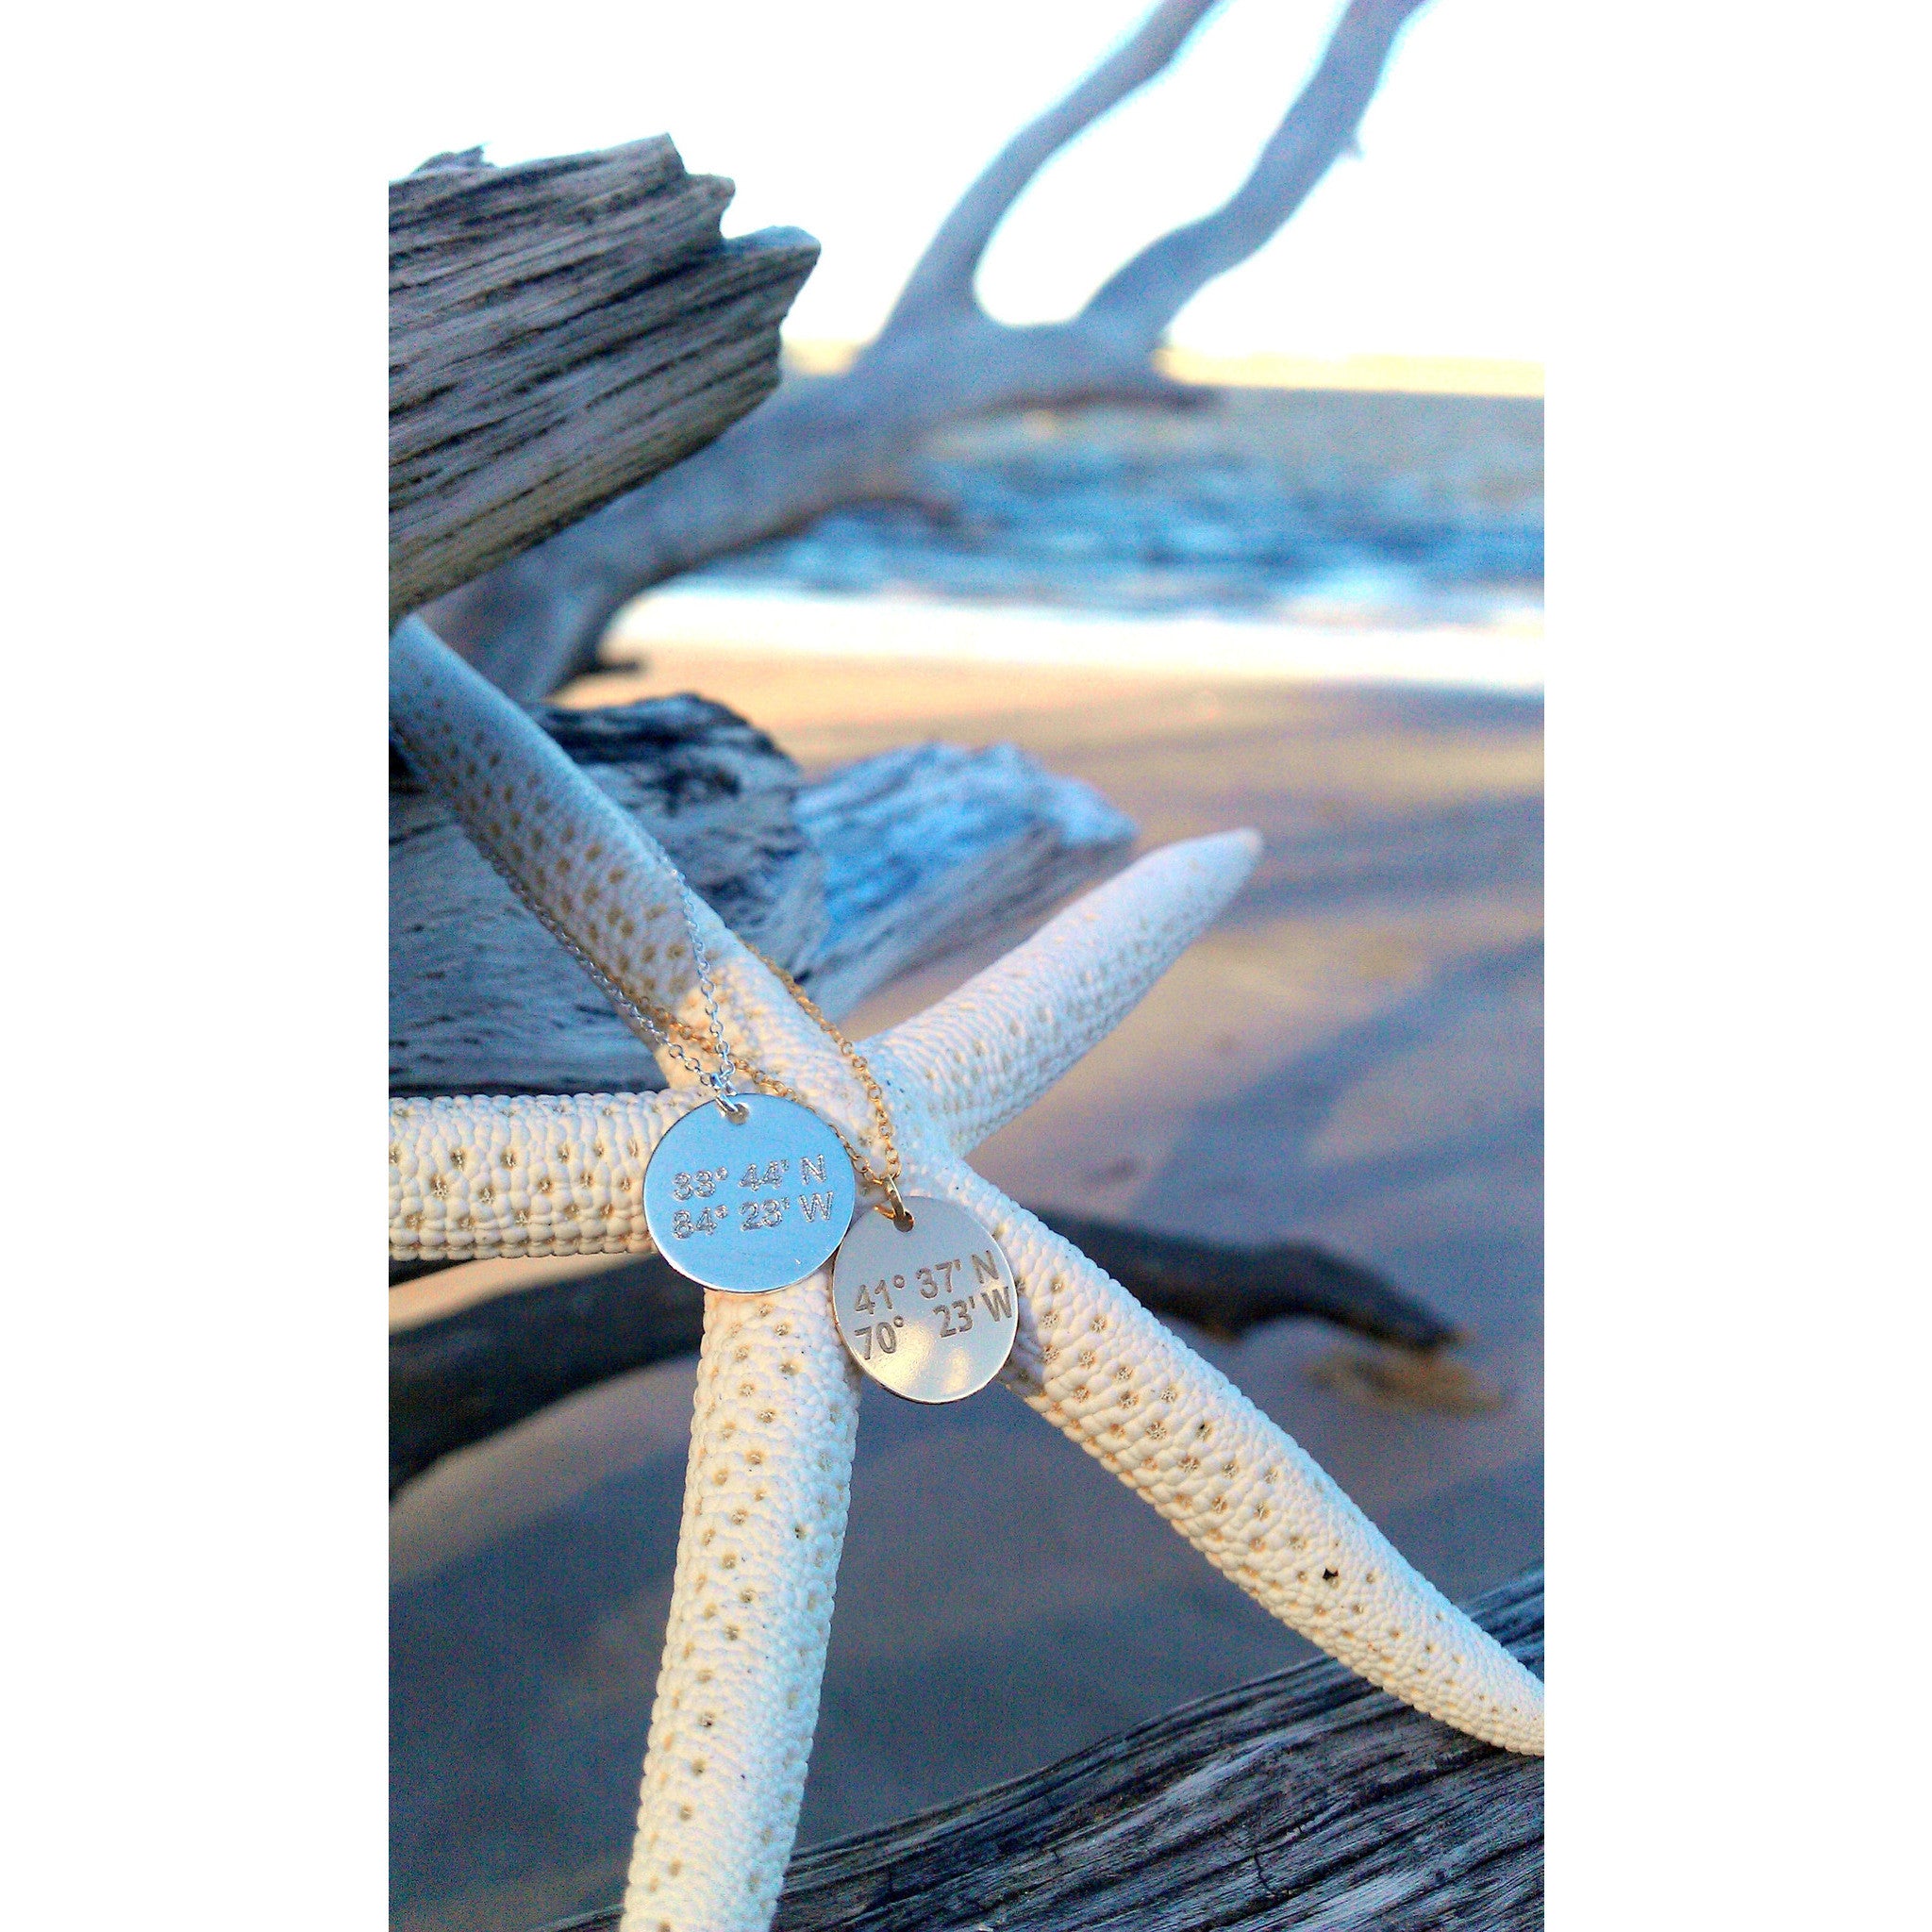 Lat & Lo disc necklace custom inscribed with coordinates hanging on a star fish on the beach.